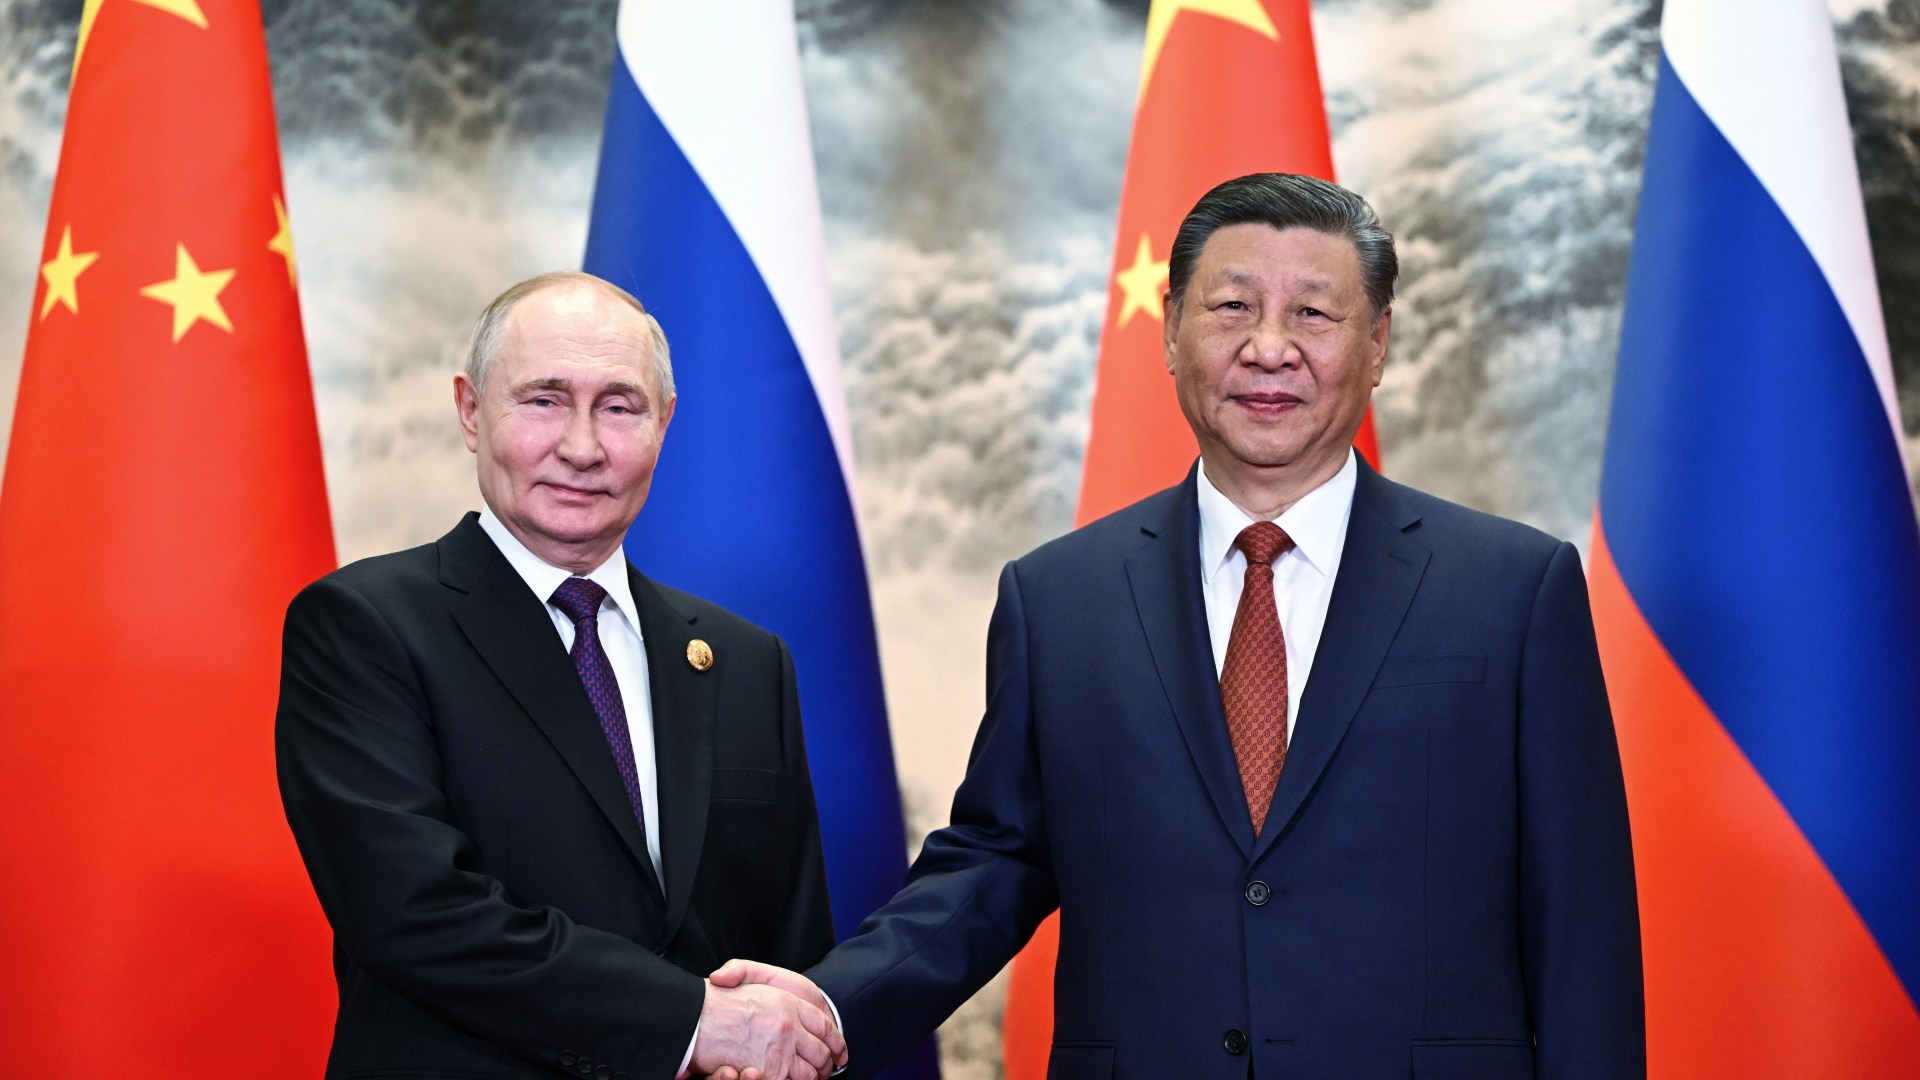 ‘We’re PEACEMAKERS’, deranged Putin & Xi say despite Ukraine slaughter & Taiwan crisis as despots hold Evil Axis talks [Video]